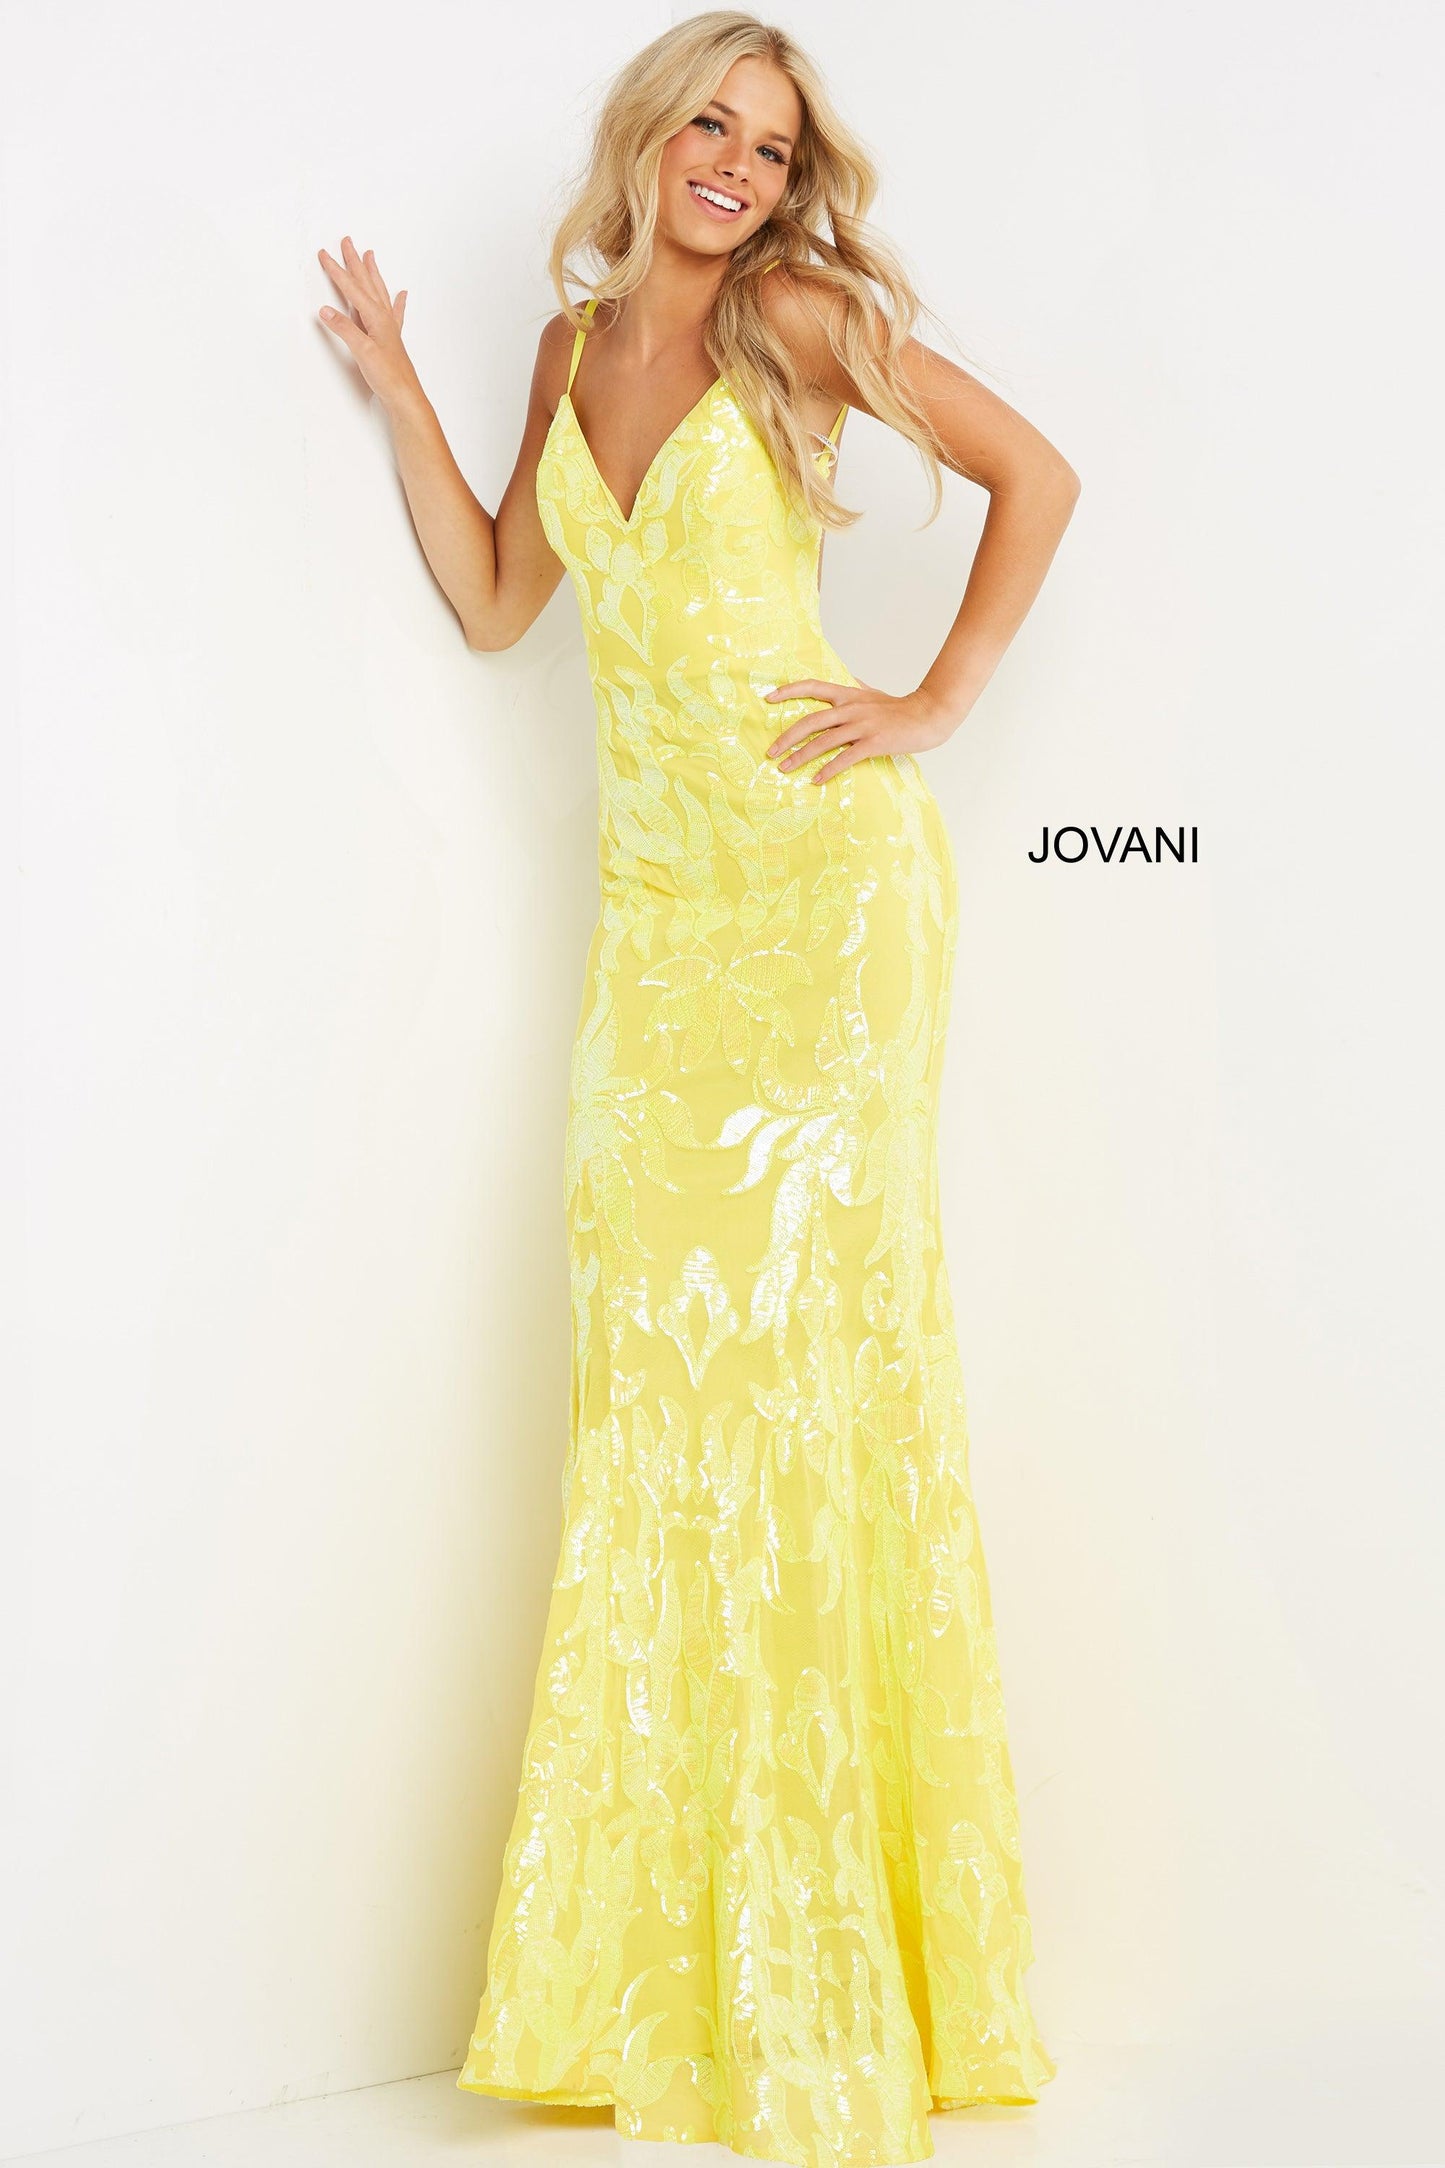 Jovani Fitted Sleeveless Long Formal Gown 07784 - The Dress Outlet